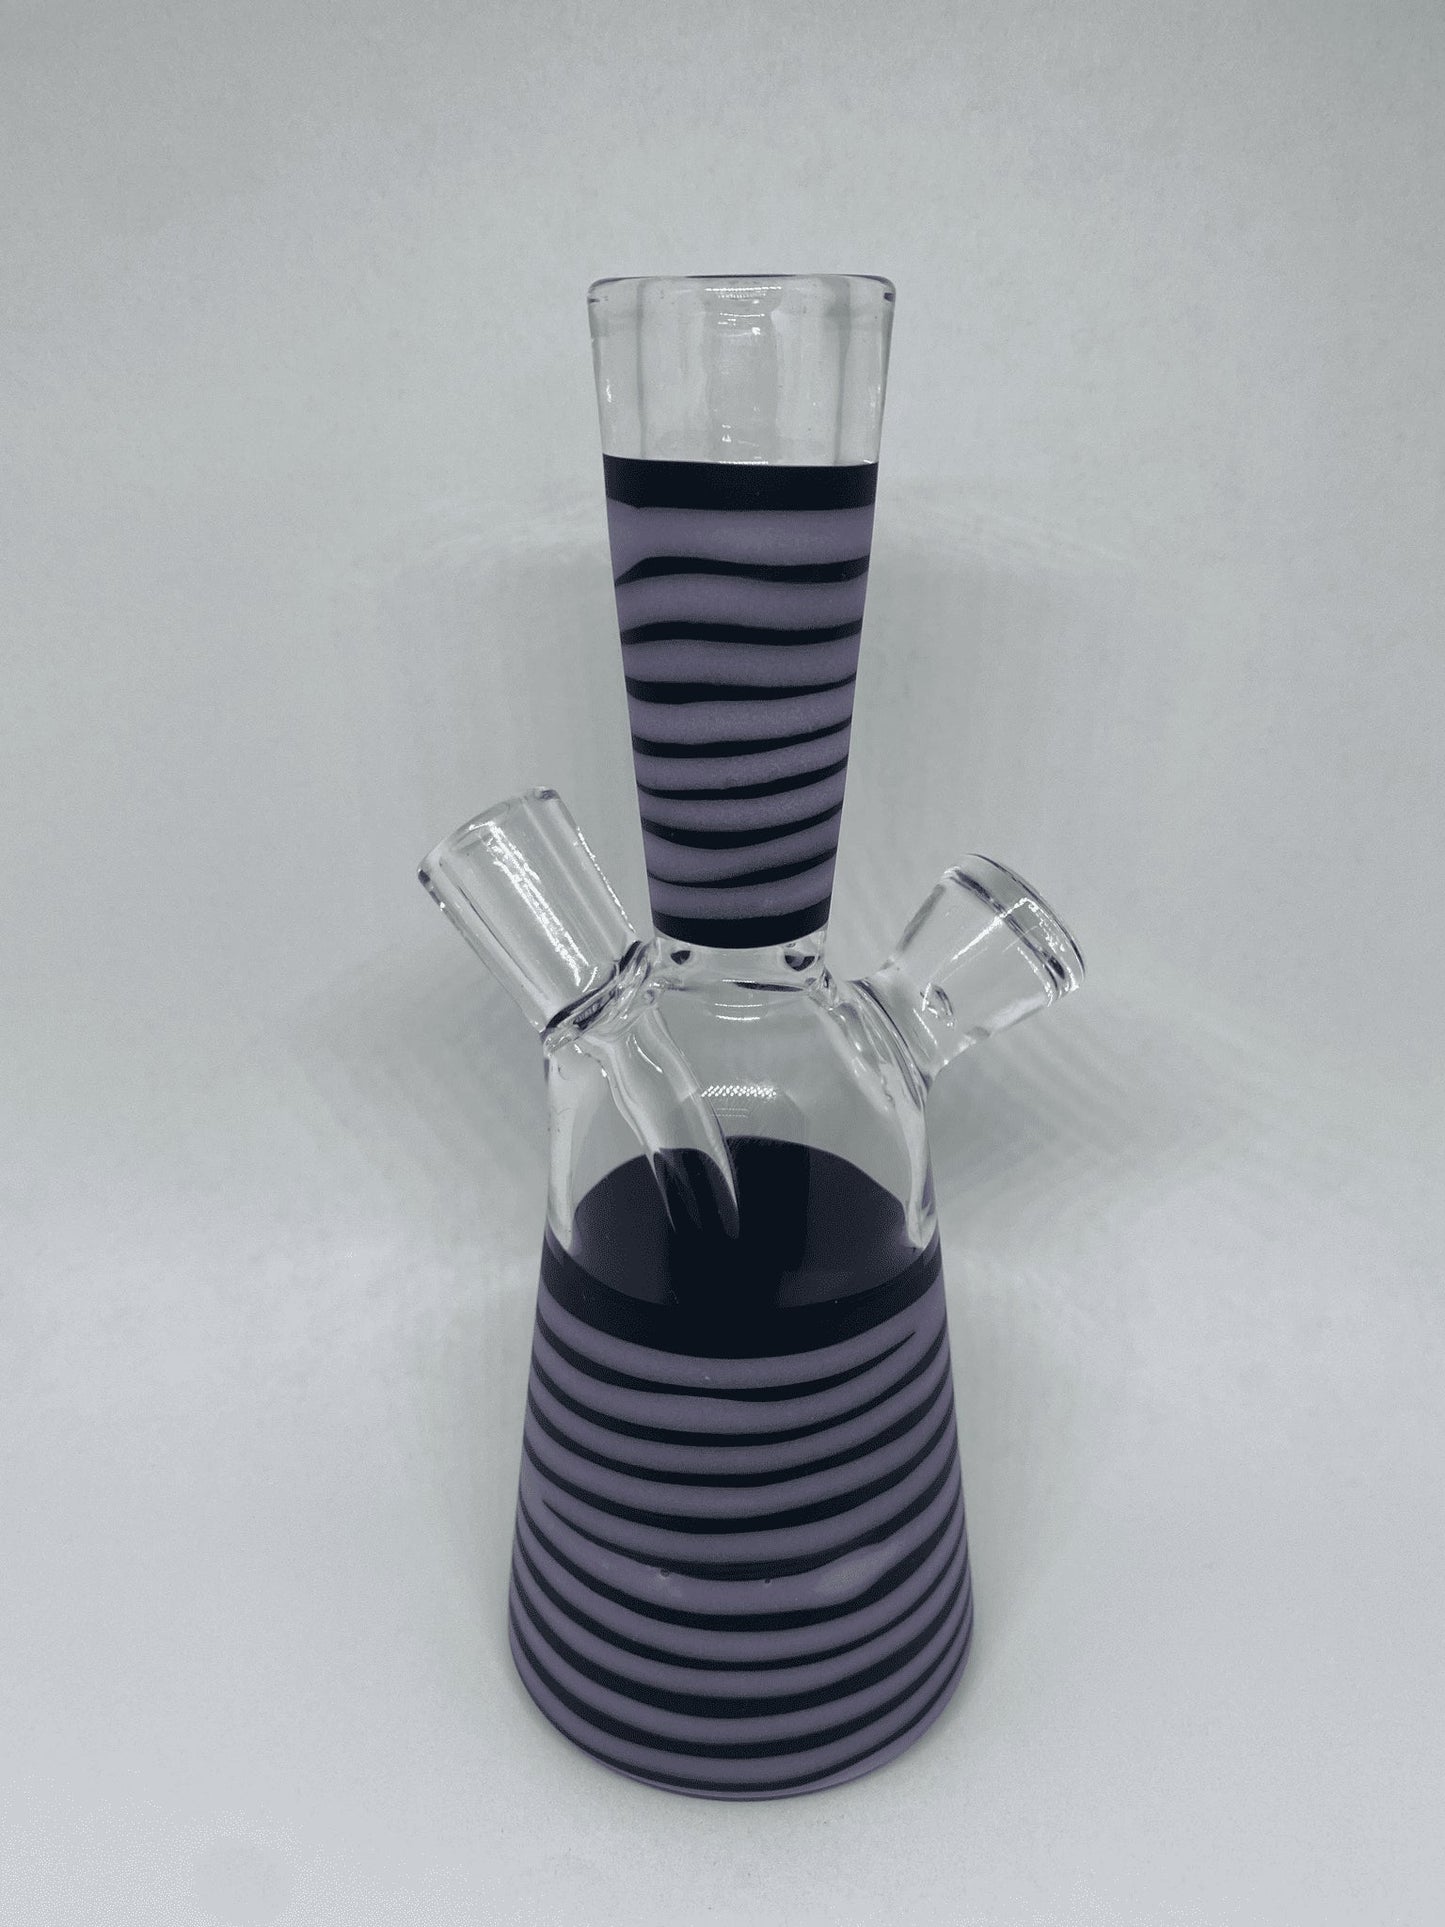 artisan-crafted art piece - Lavender Diamond Series Zoo Tube (A) by Robertson Glass (2021)